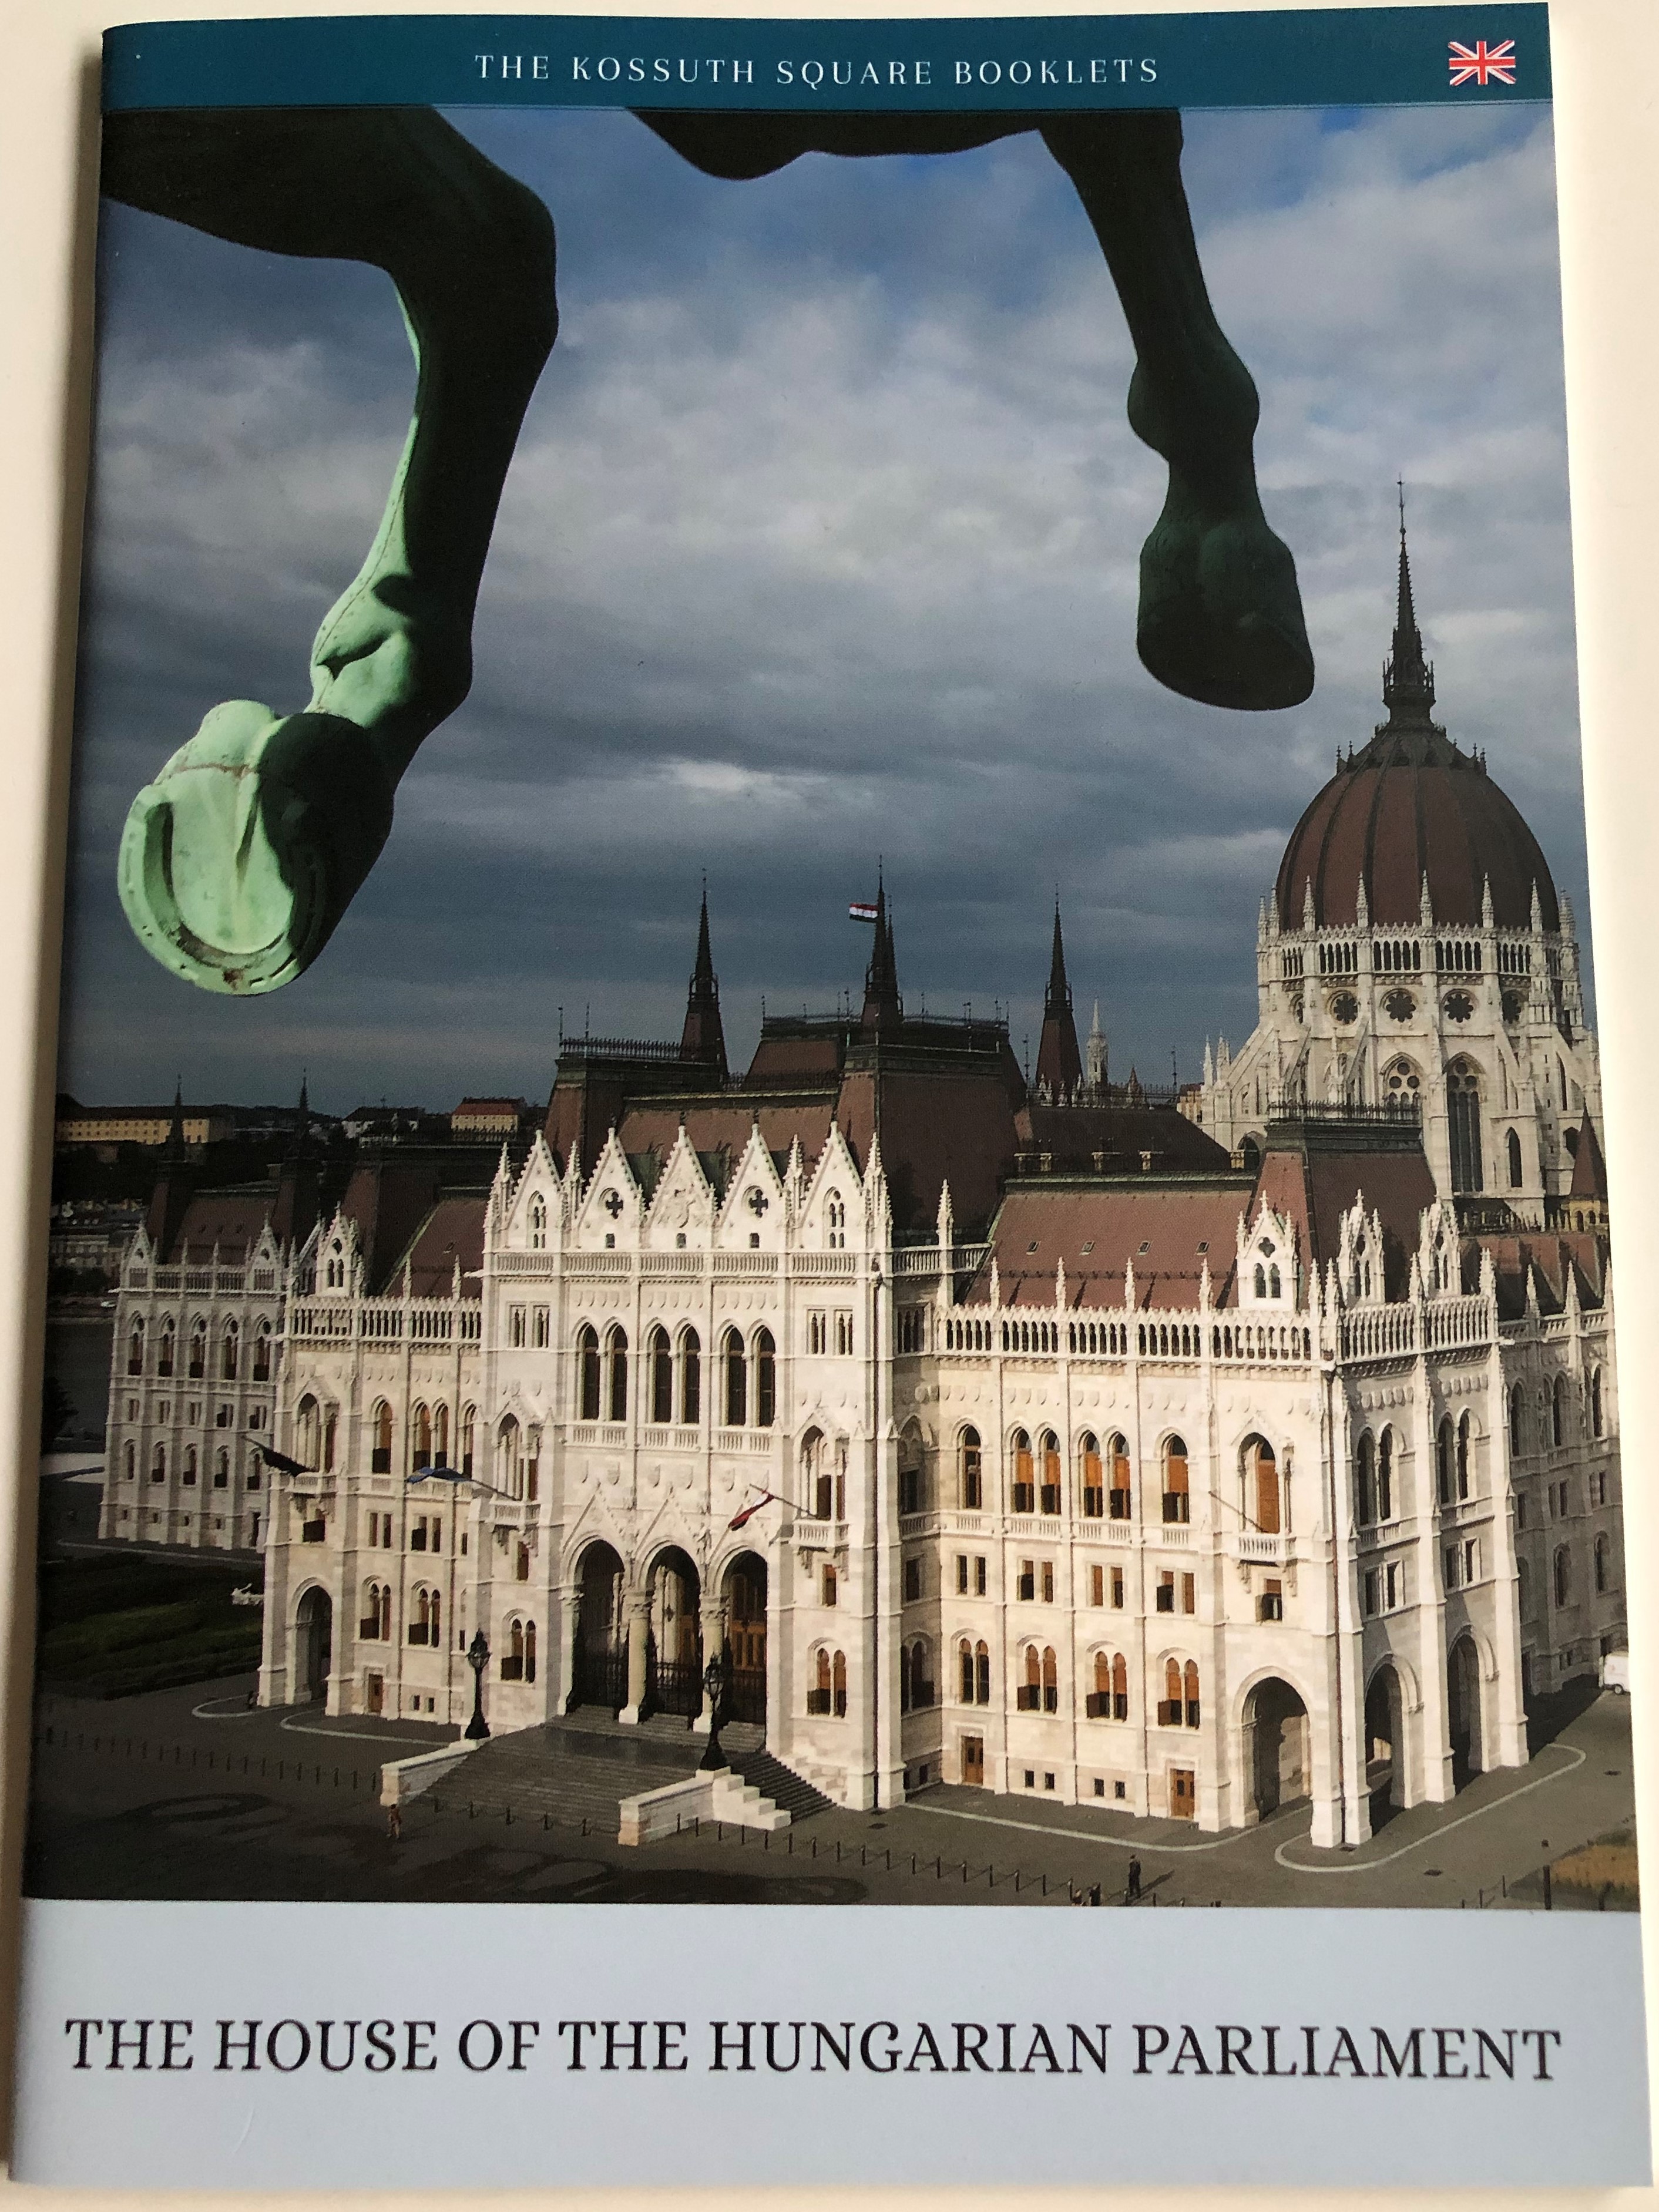 the-house-of-the-hungarian-parliament-by-andr-s-t-r-k-the-kossuth-square-booklets-the-office-of-the-national-assembly-2016-1-.jpg